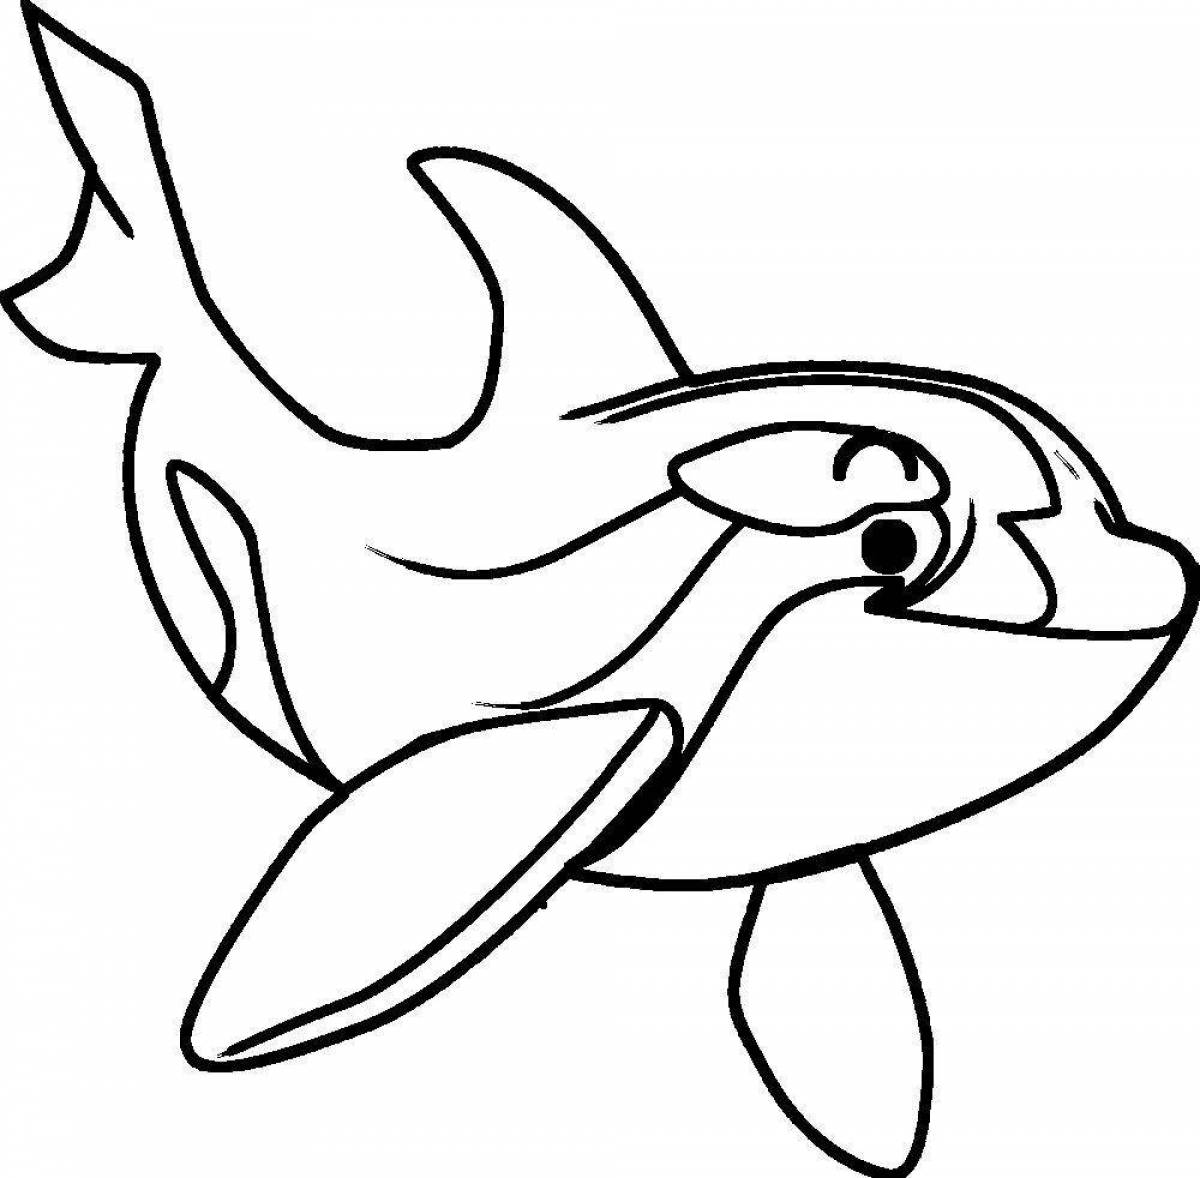 Funny killer whale coloring book for kids